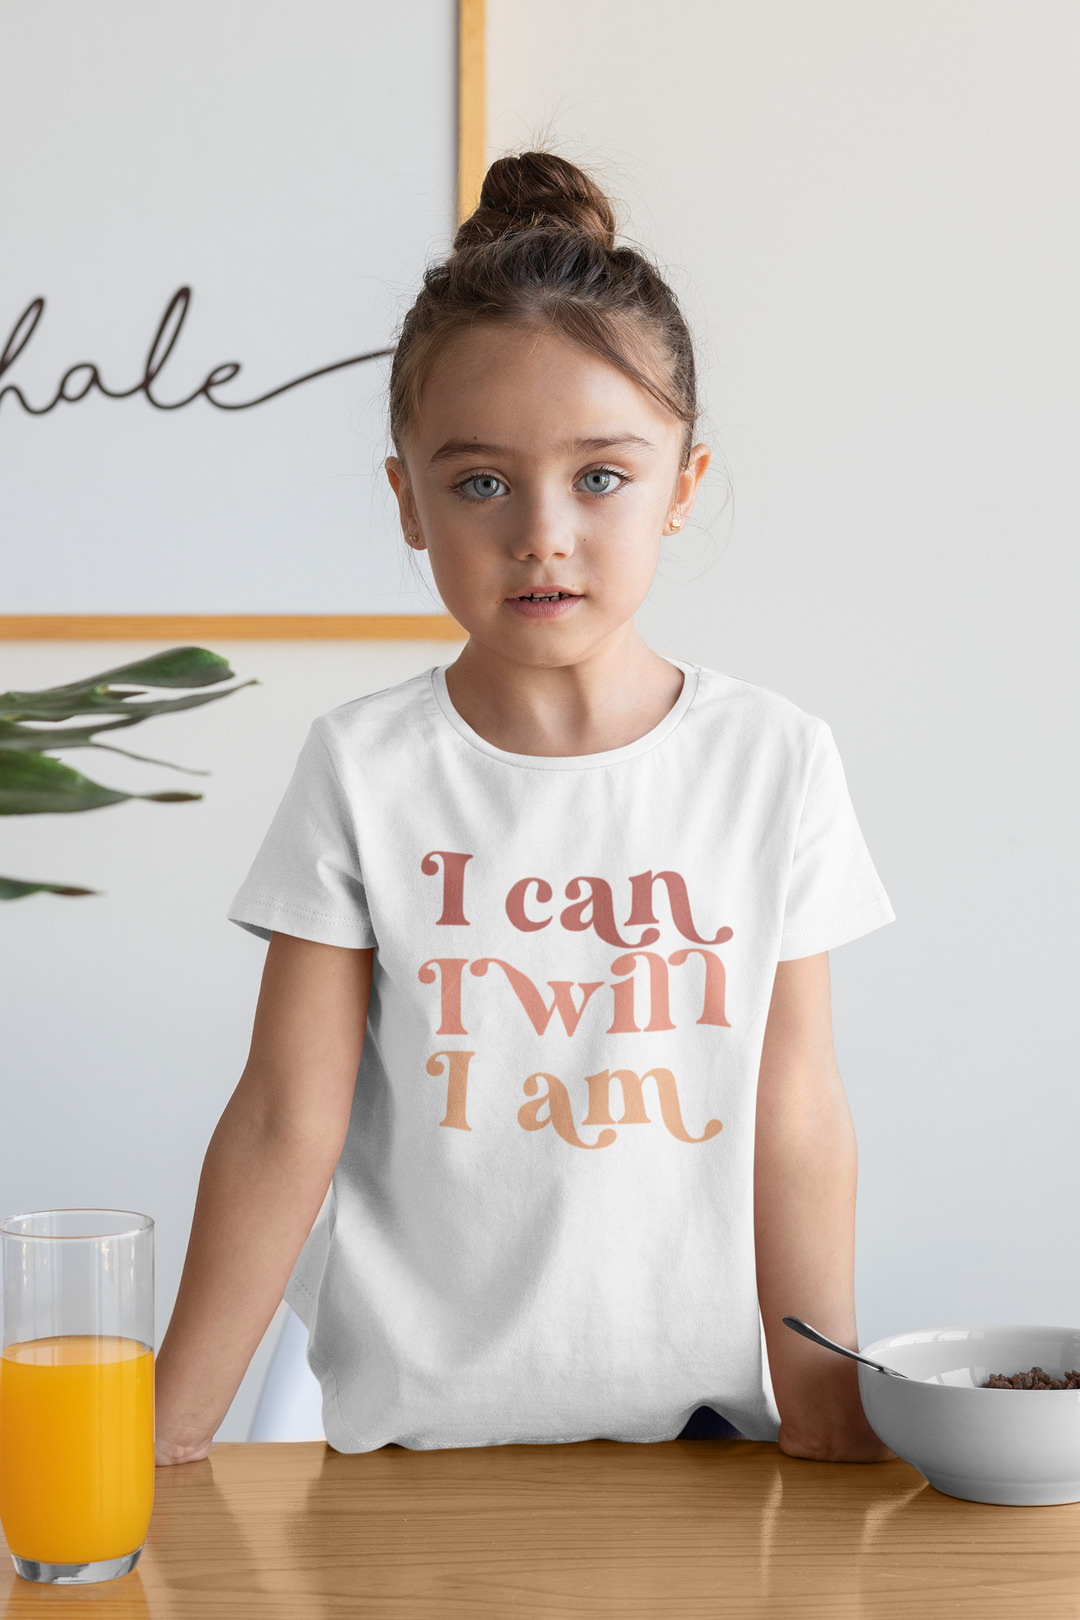 I Can And I Will I Am. Short Sleeve T Shirt For Toddler And Kids. - TeesForToddlersandKids -  t-shirt - positive - i-can-and-i-will-i-am-short-sleeve-t-shirt-for-toddler-and-kids